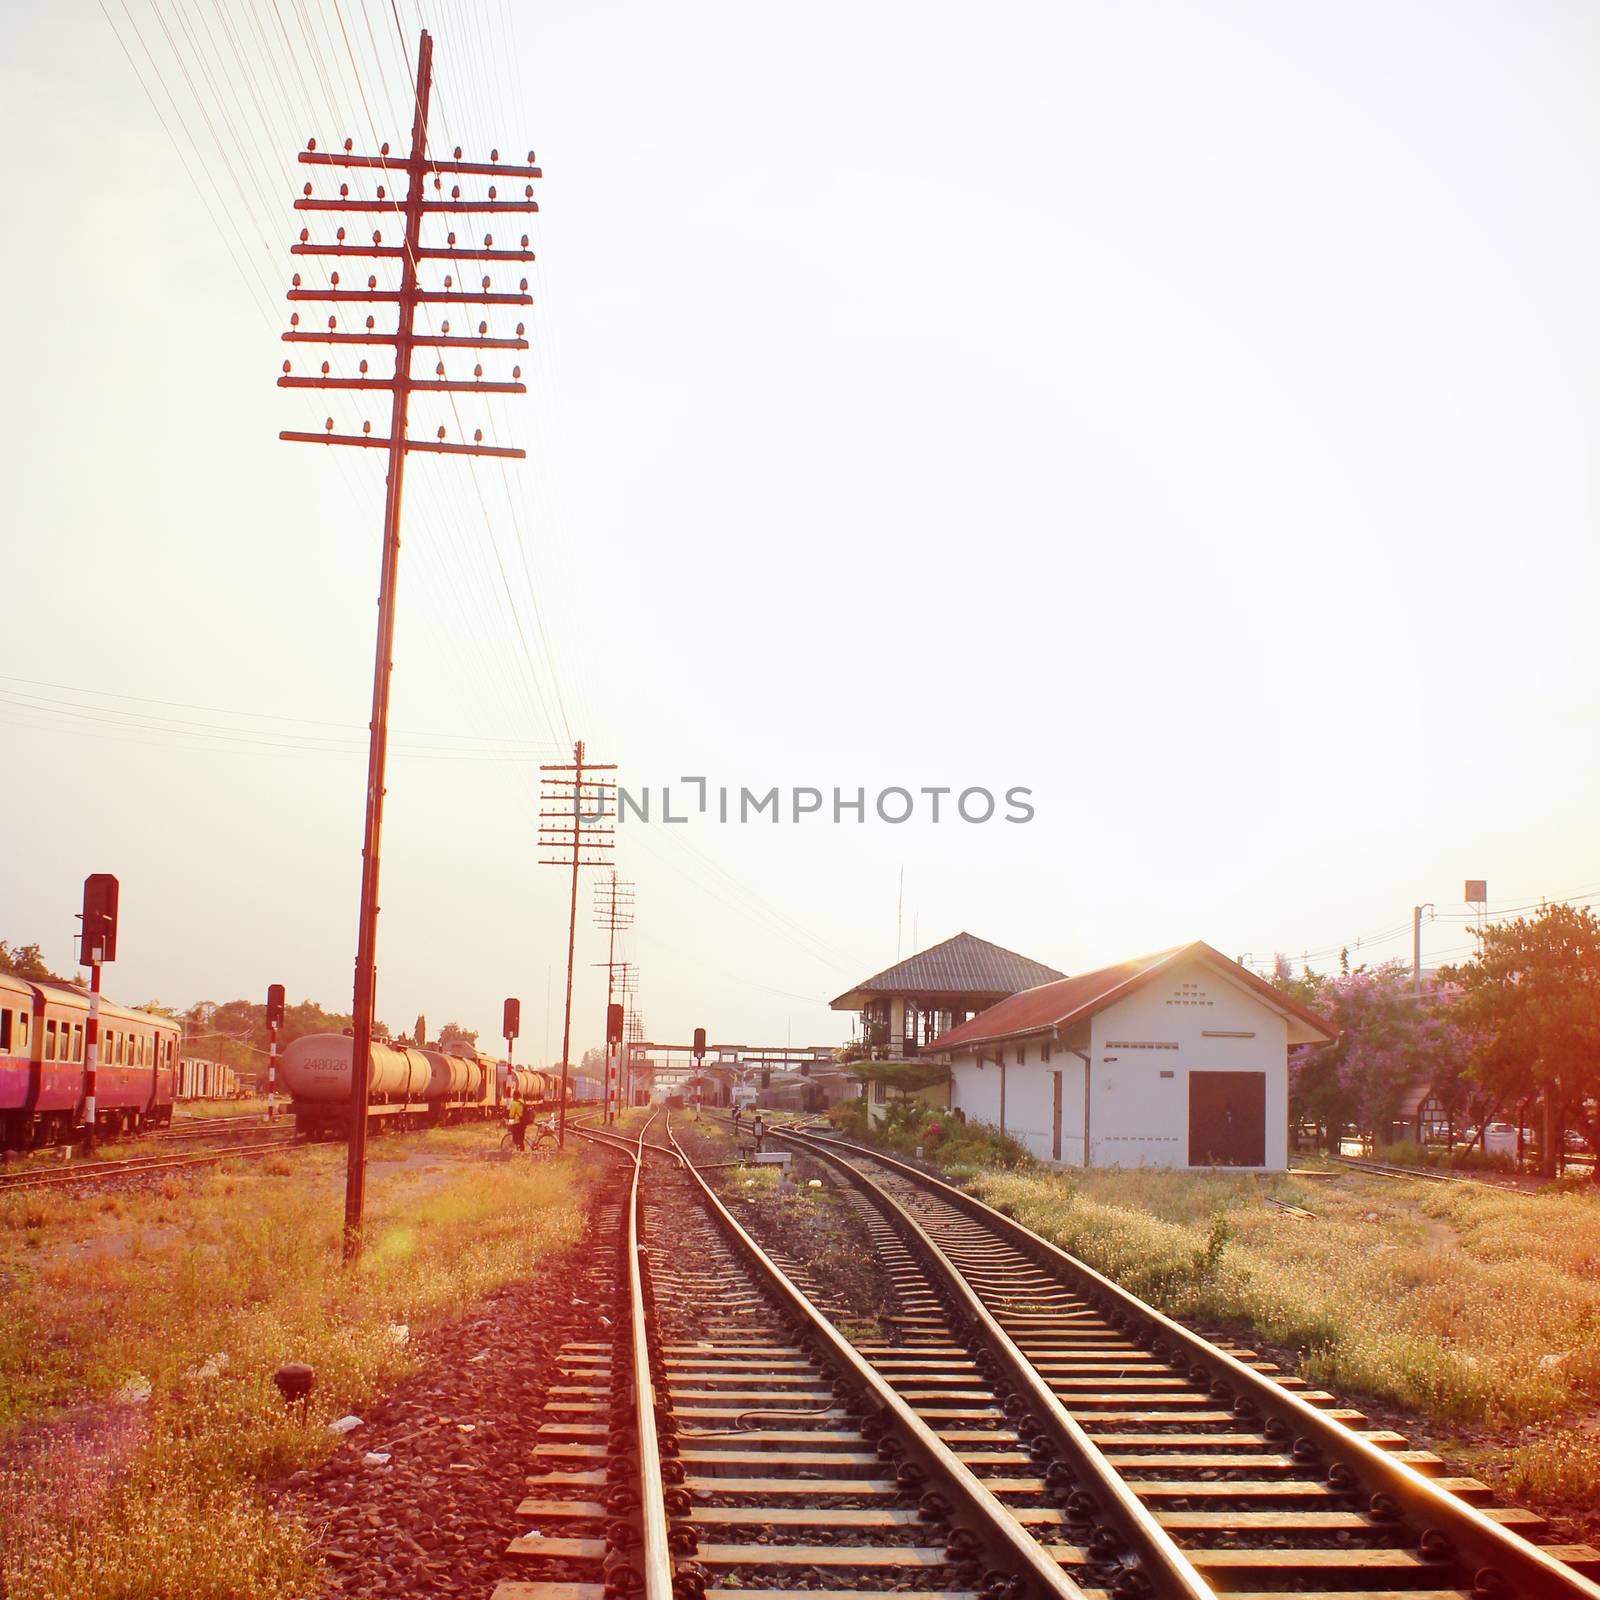 Old railway station with retro filter effect